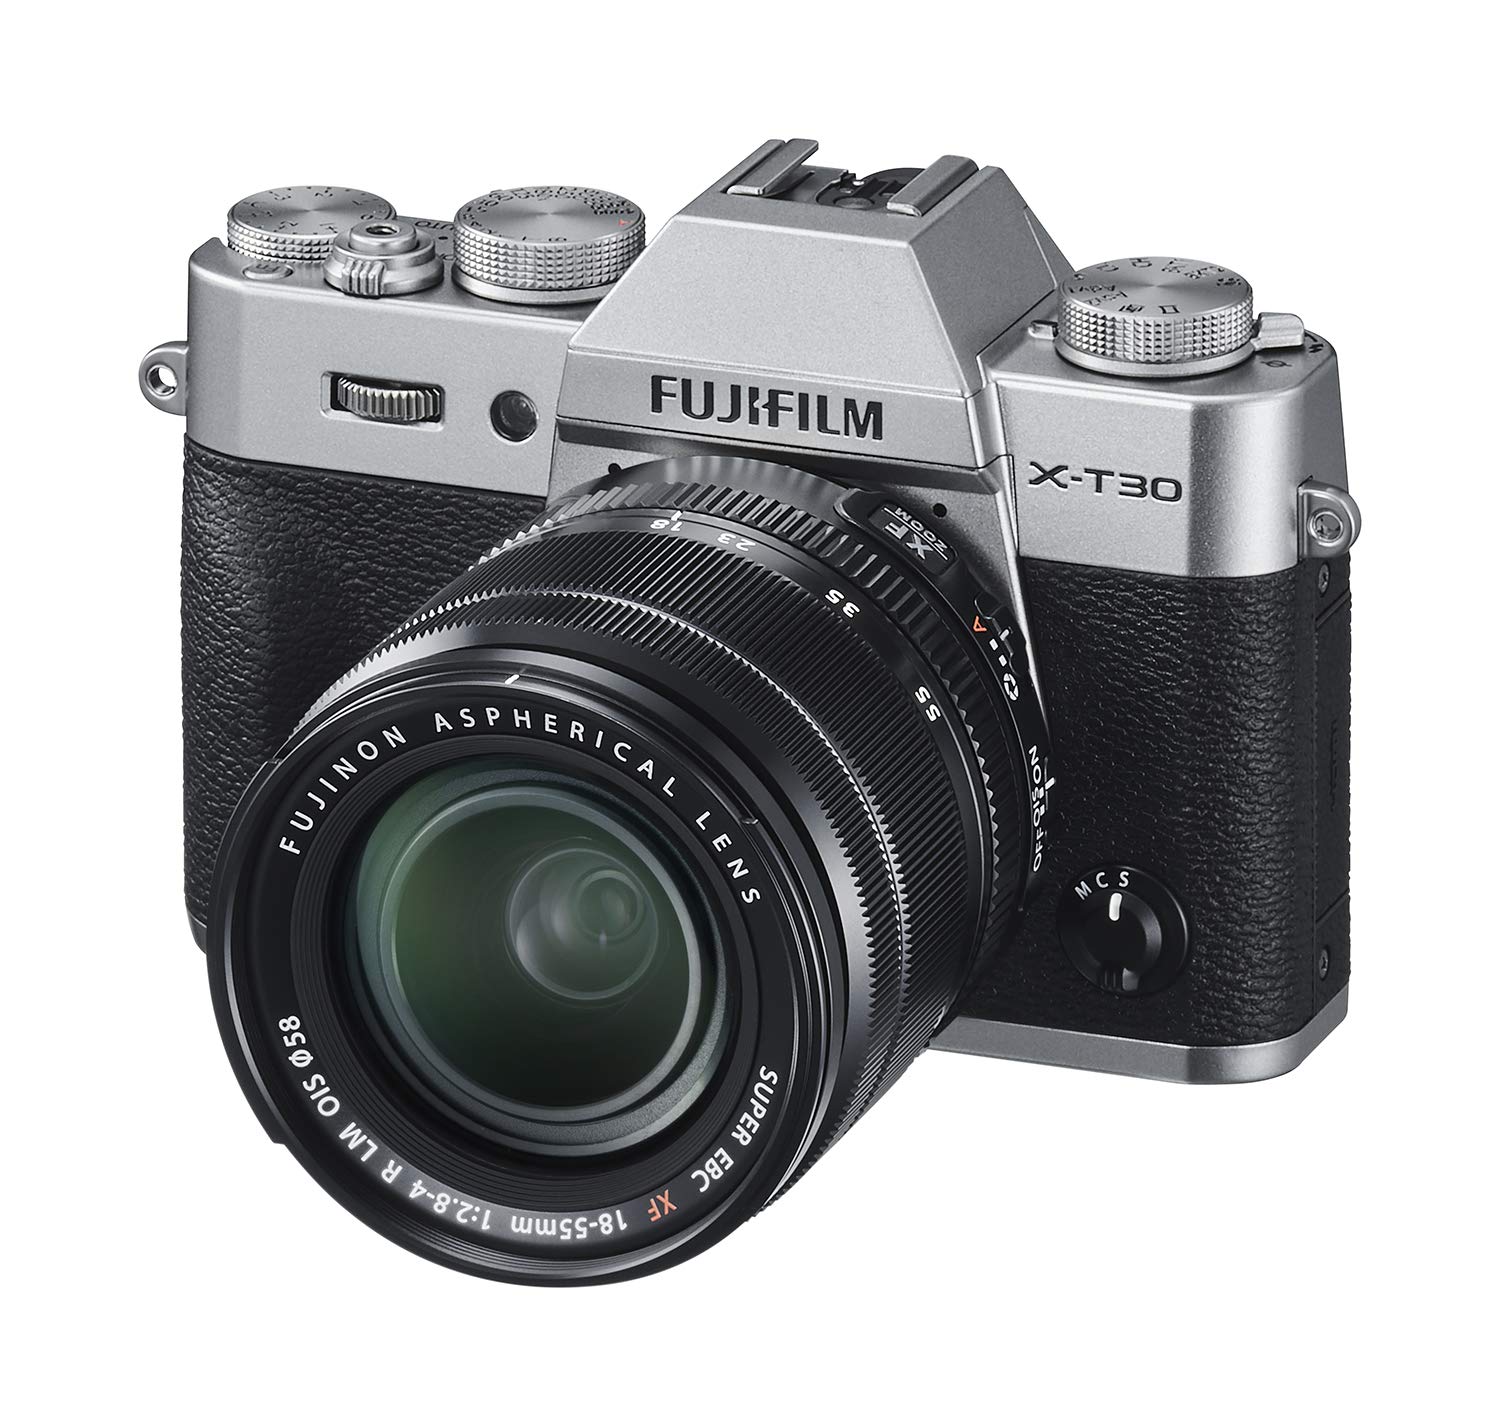 Fujifilm X-T30 Mirrorless Camera with XF 18-55mm f/2.8-4 R LM OIS Lens - Charcoal Silver